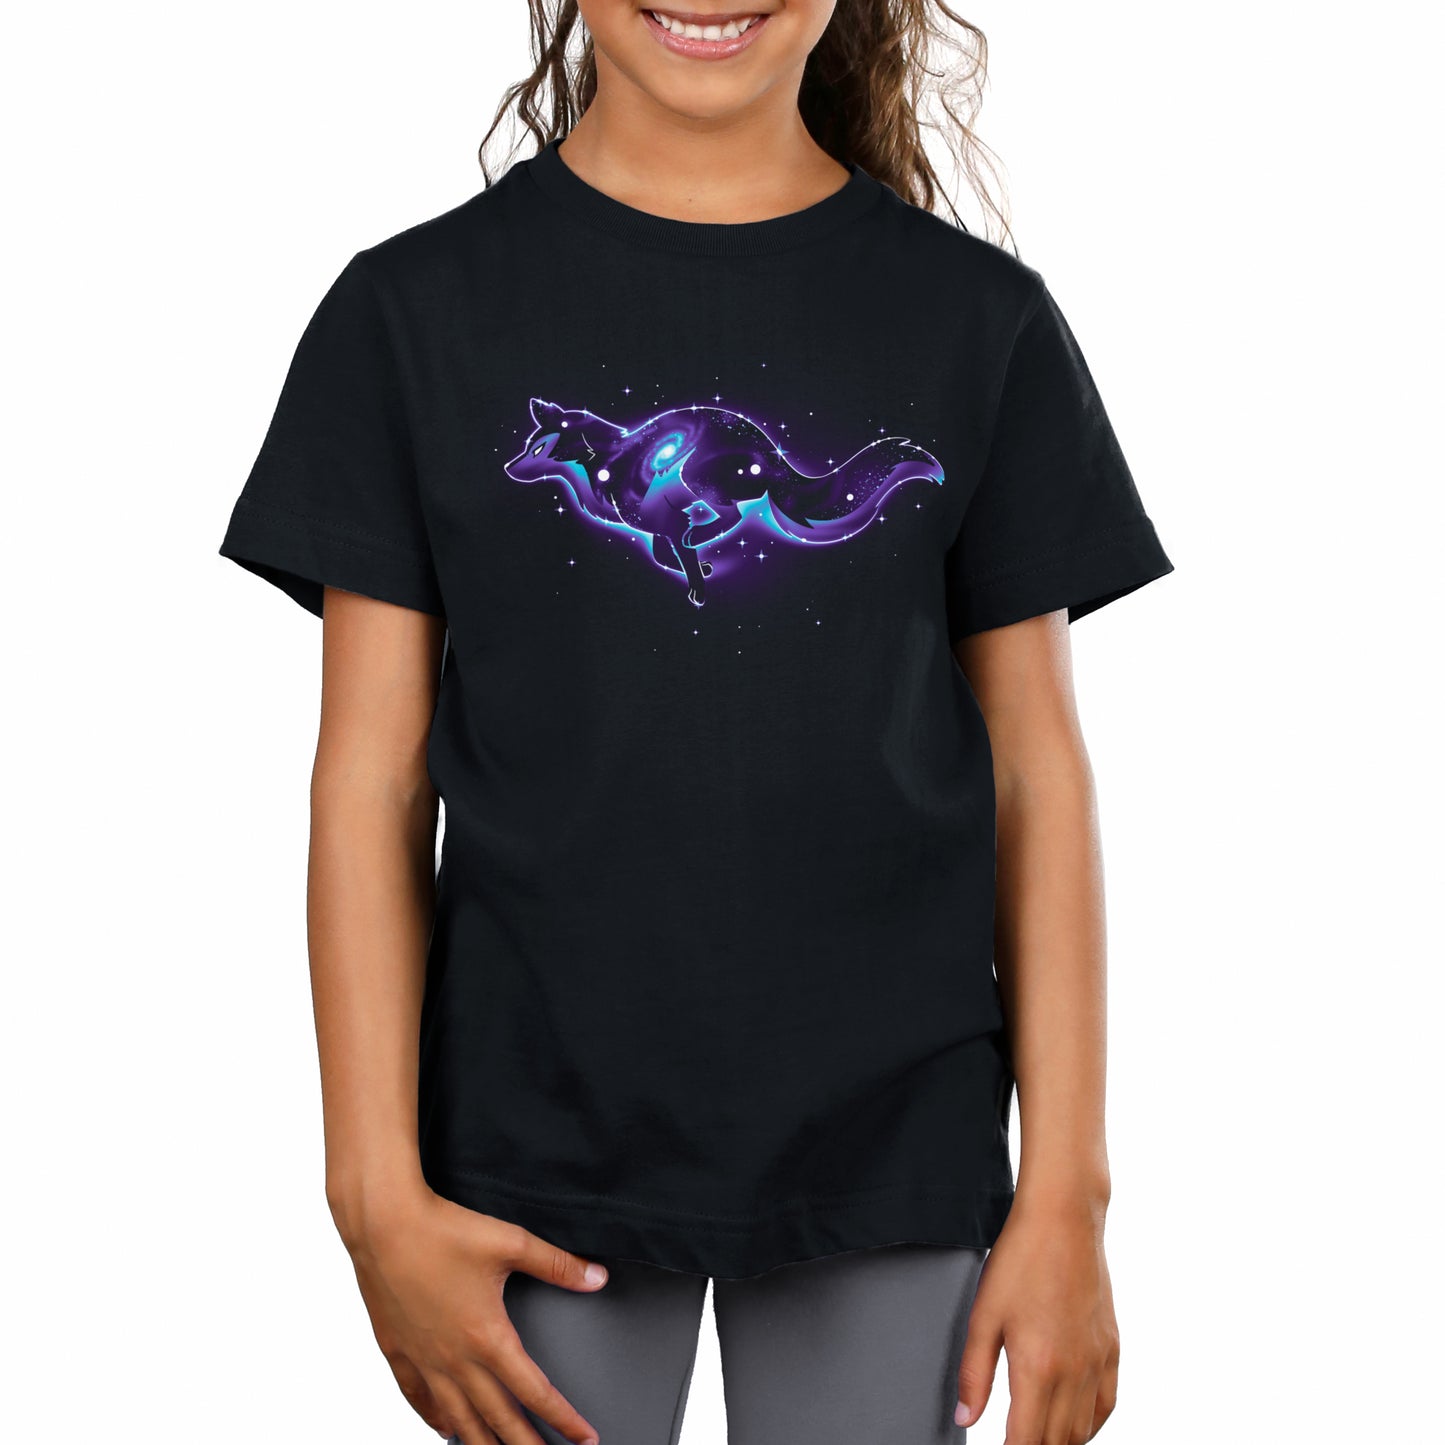 A girl wearing a black Lupine Constellation t-shirt by TeeTurtle, with an image of a cat in space enjoying comfort.